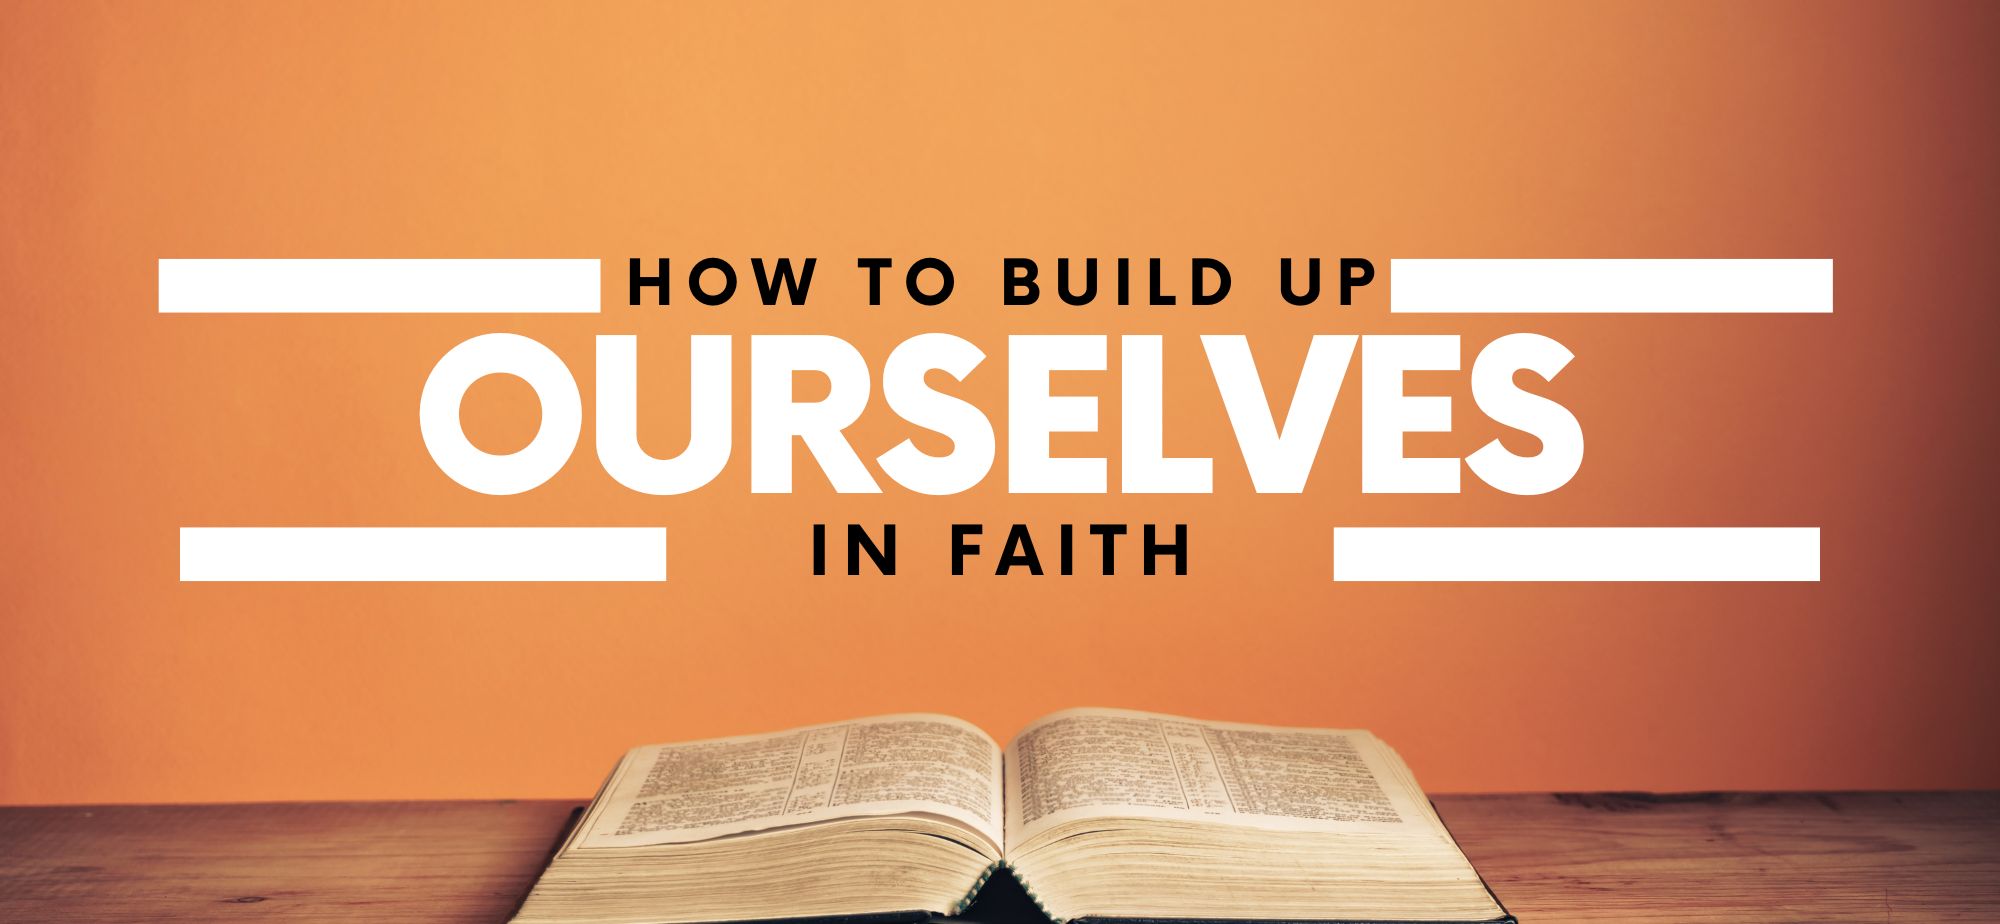 How To Build Up Ourselves in Faith - Pastor Greg Neal